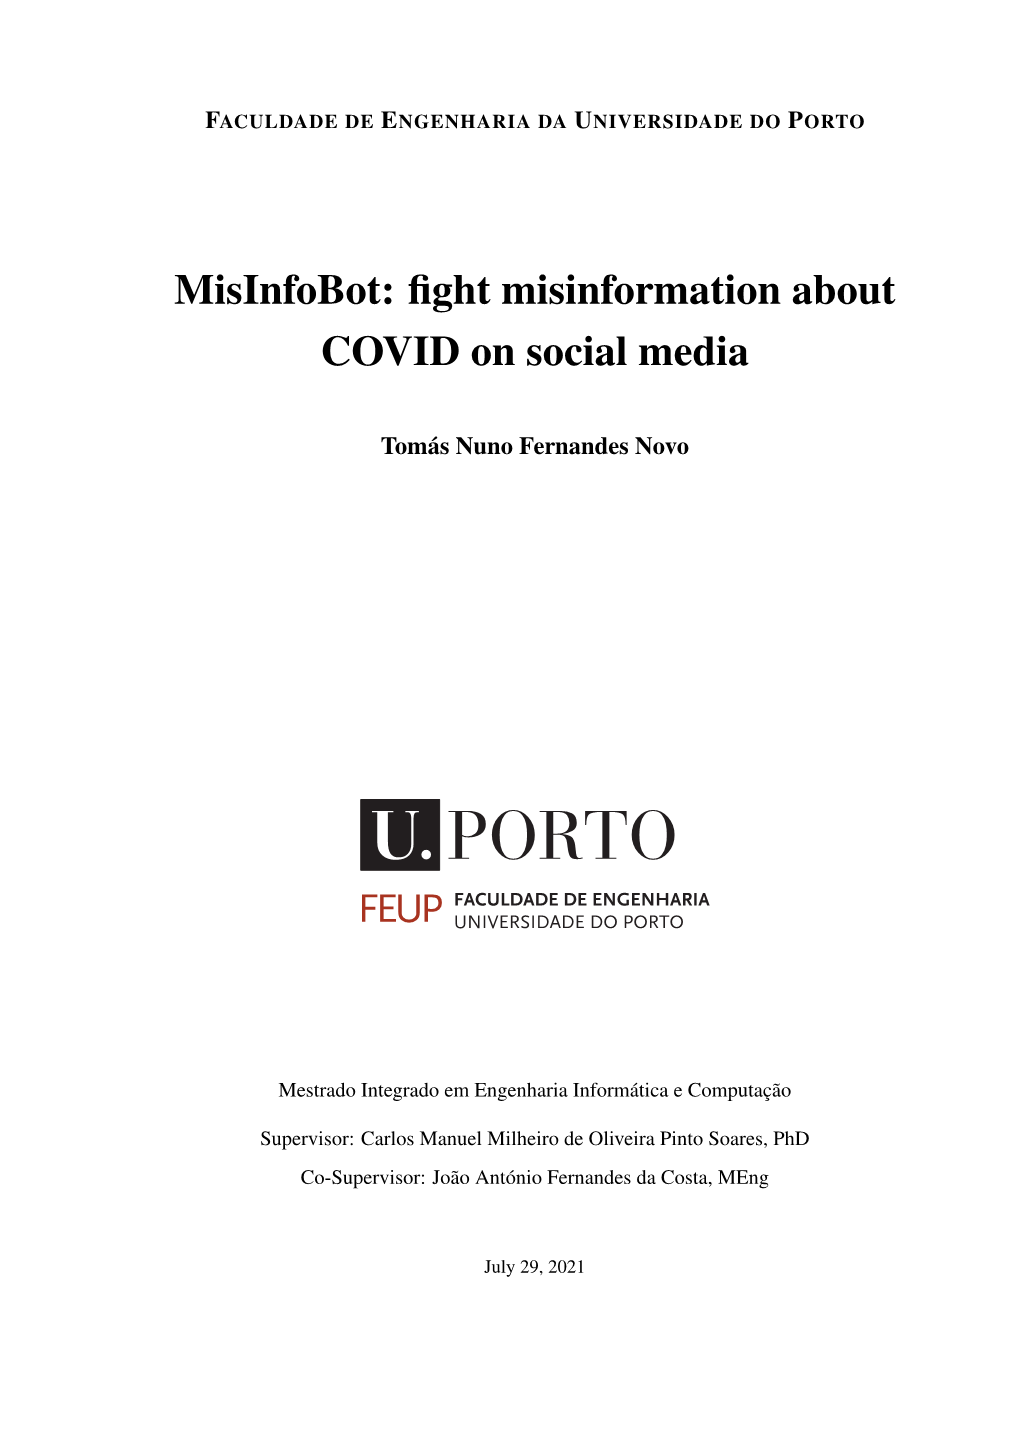 Misinfobot: Fight Misinformation About COVID on Social Media